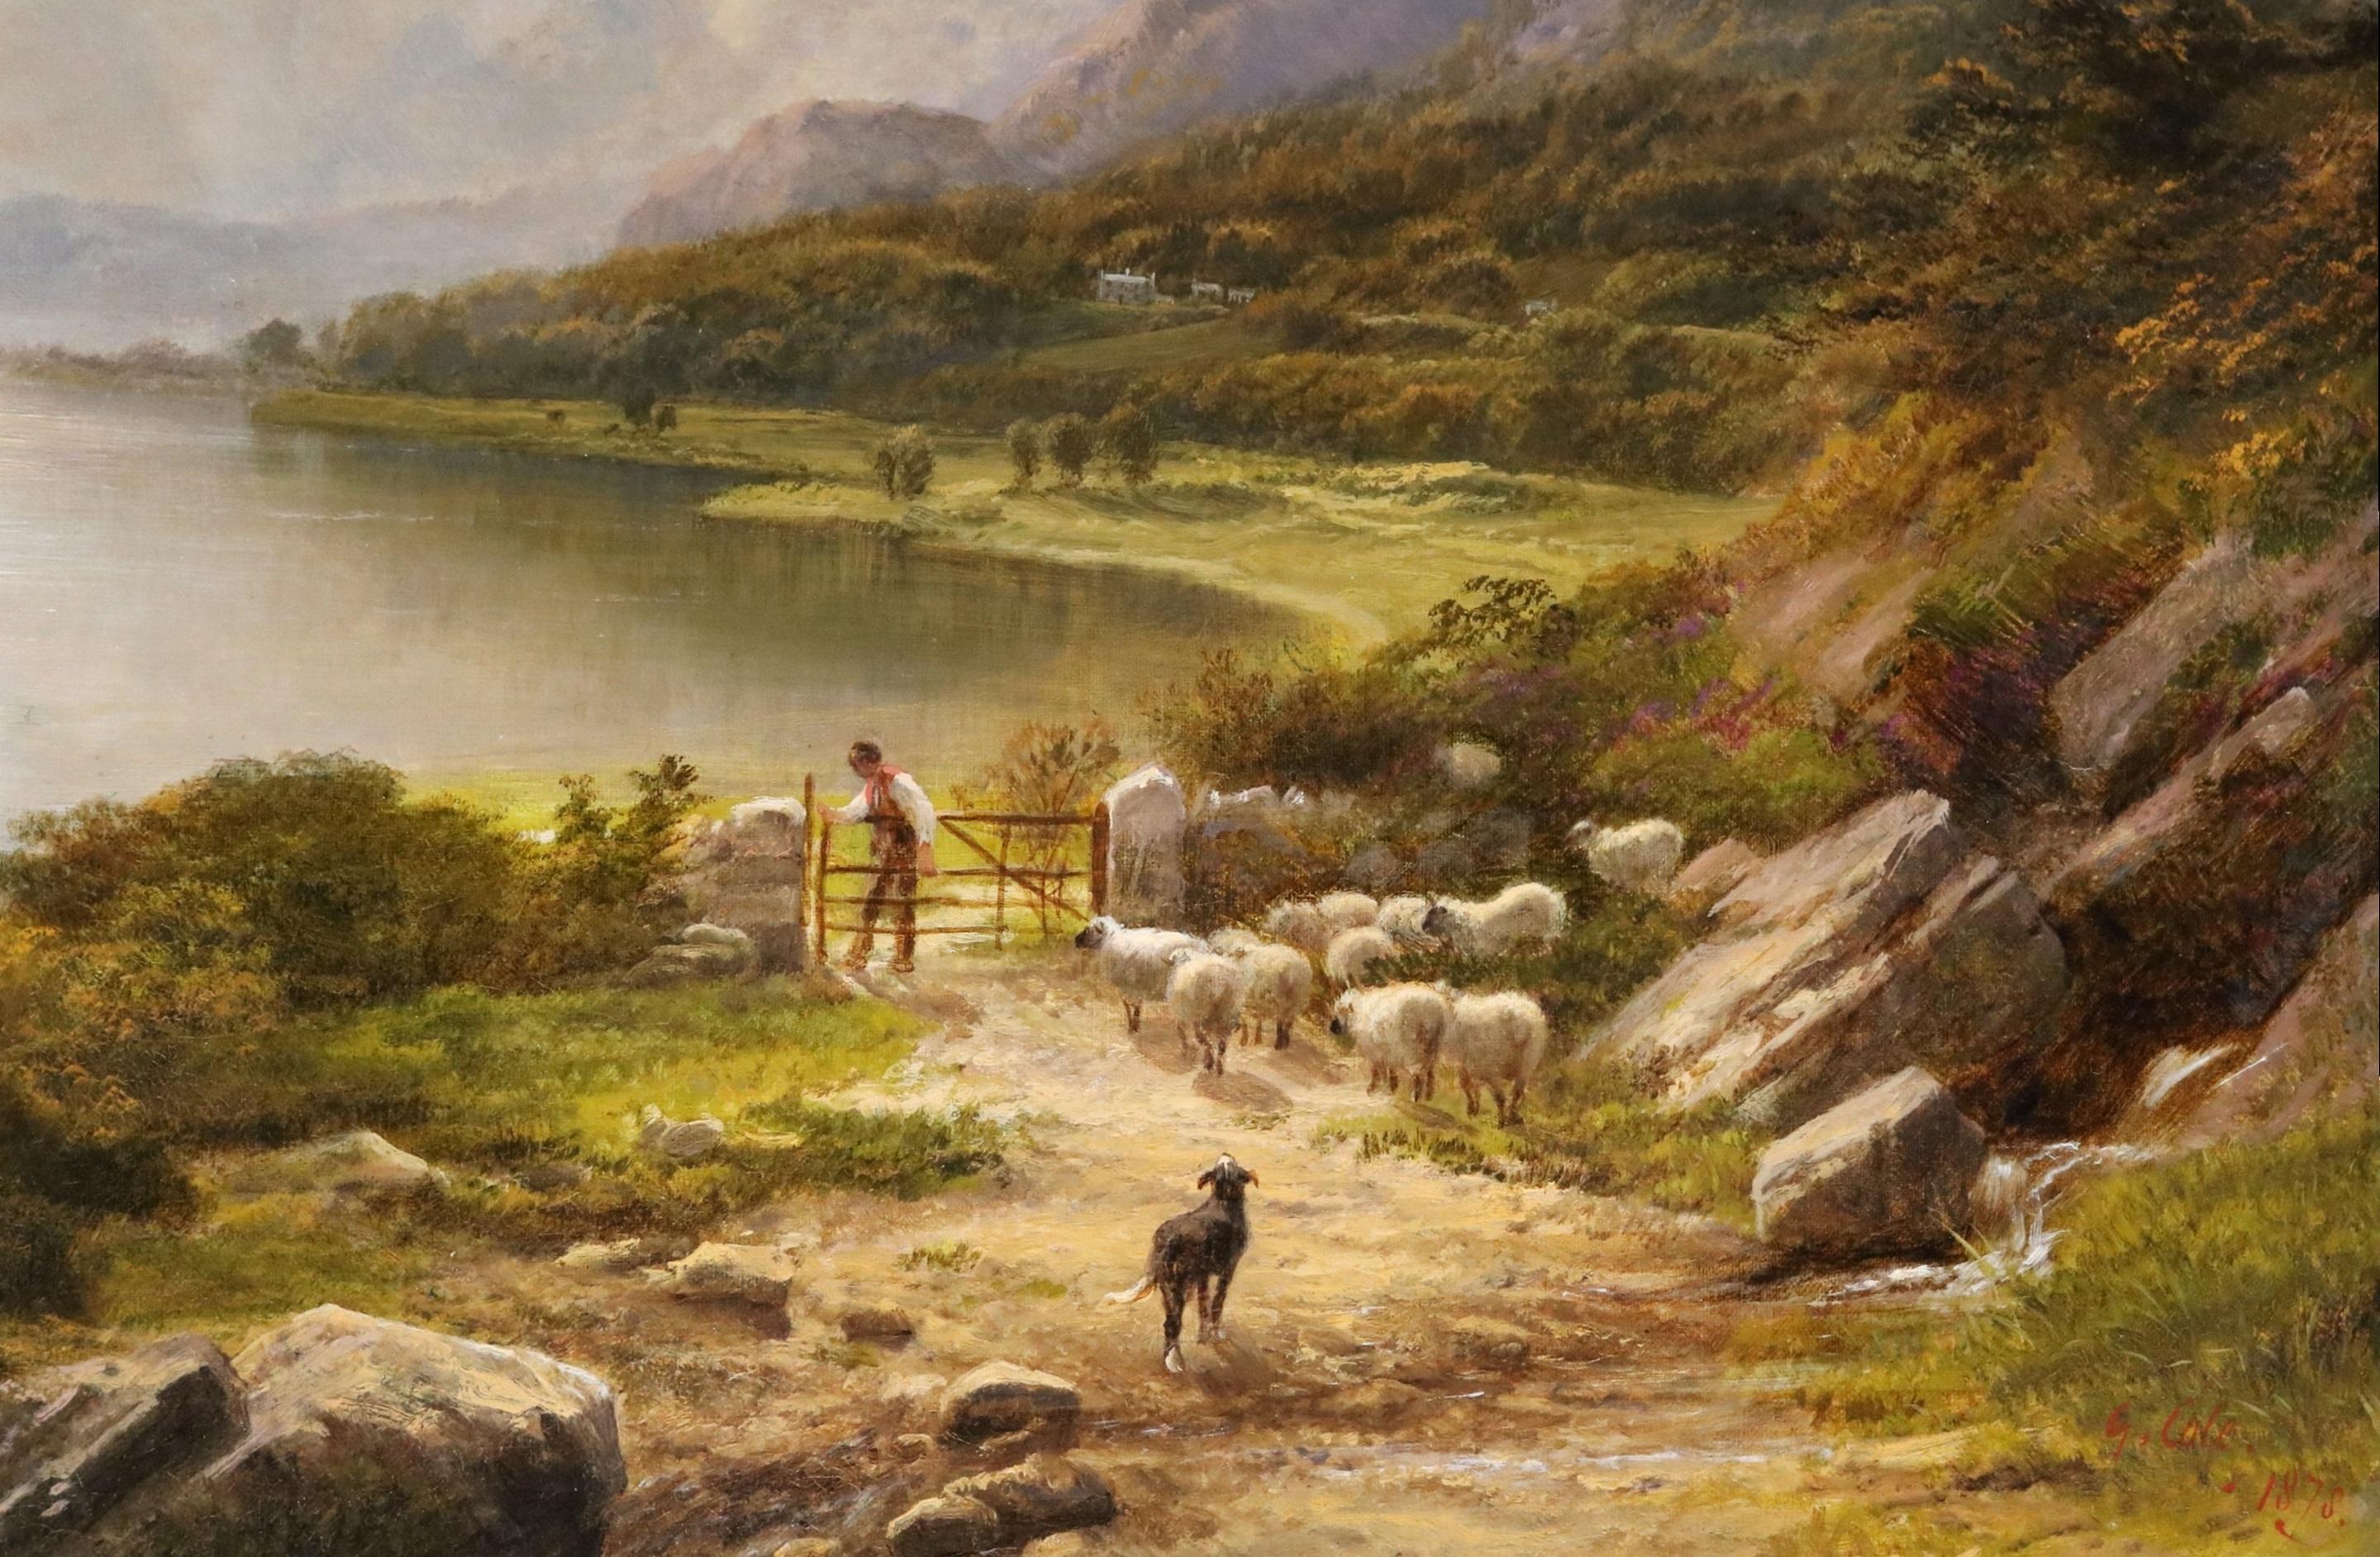 ‘Thirlmere and Helvellyn from Raven Crag’ by George Cole RBA (1810-1883). The painting – which depicts Thirlmere lake in Cumbria prior its damming, with the mountain of Helvellyn in the distance - is signed by the artist and dated 1878, in which